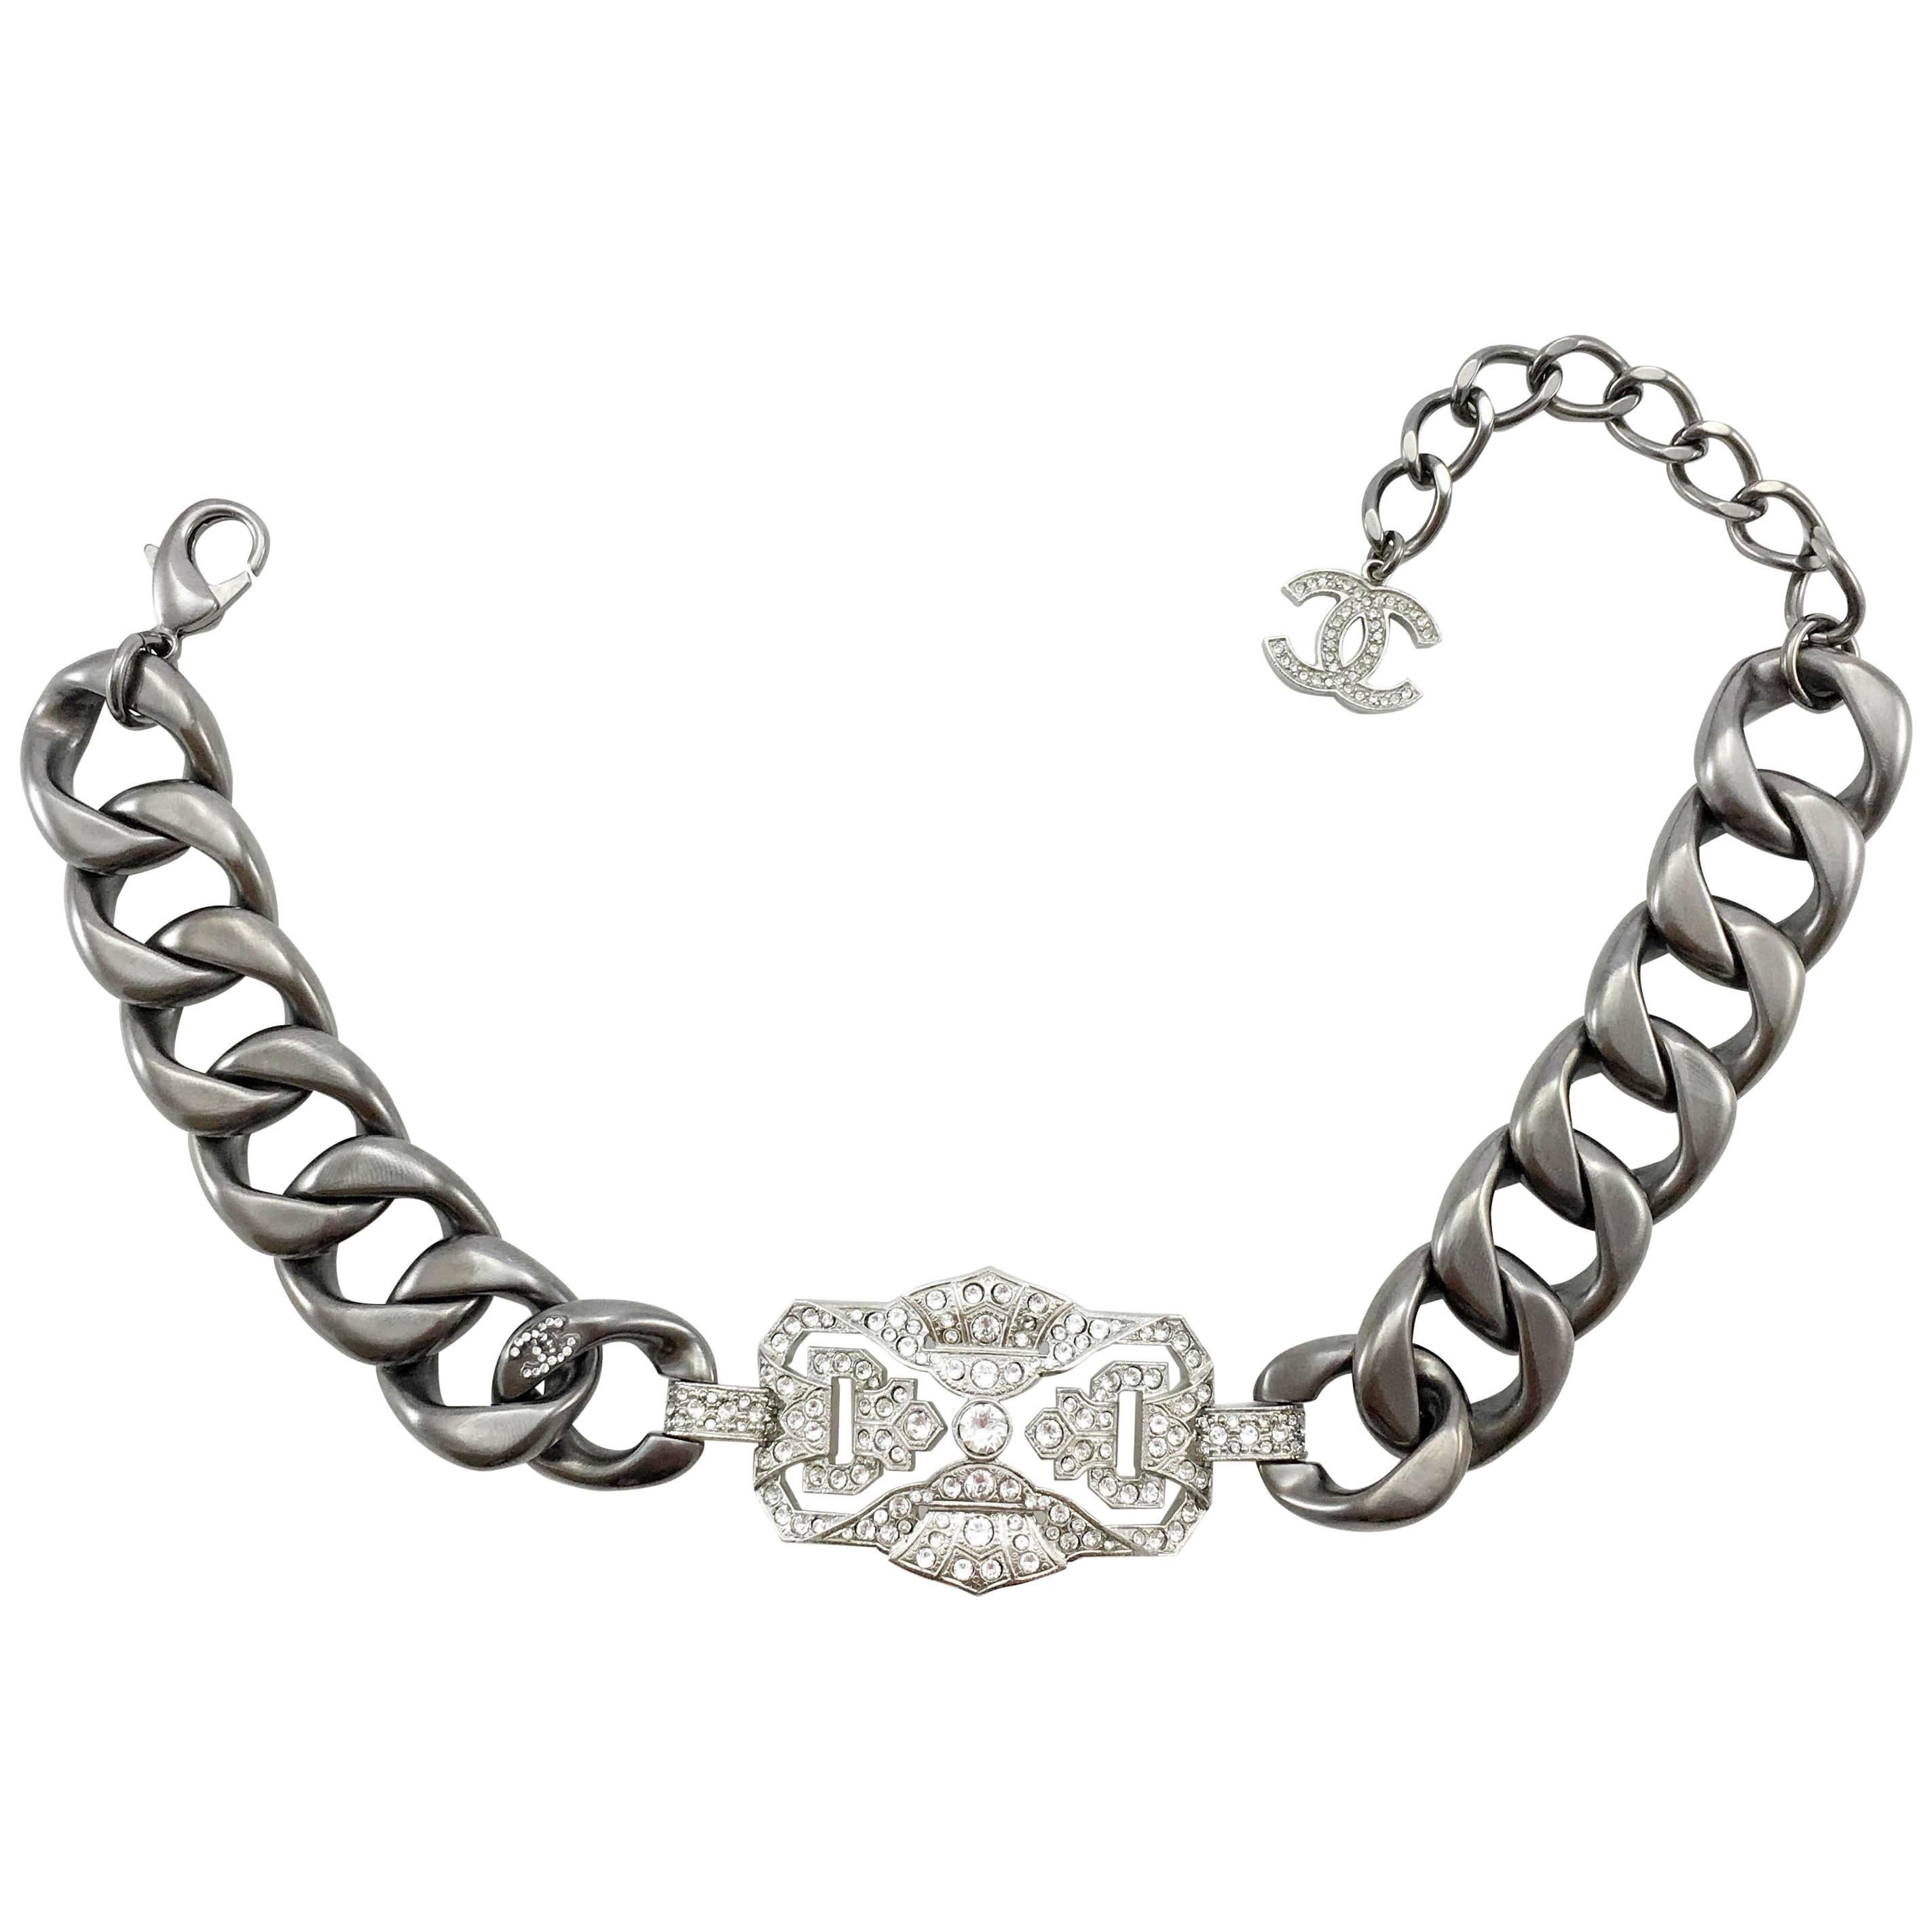 Chanel Runway Look Diamanté Embellished Gunmetal Coloured Chunky Chain Choker For Sale